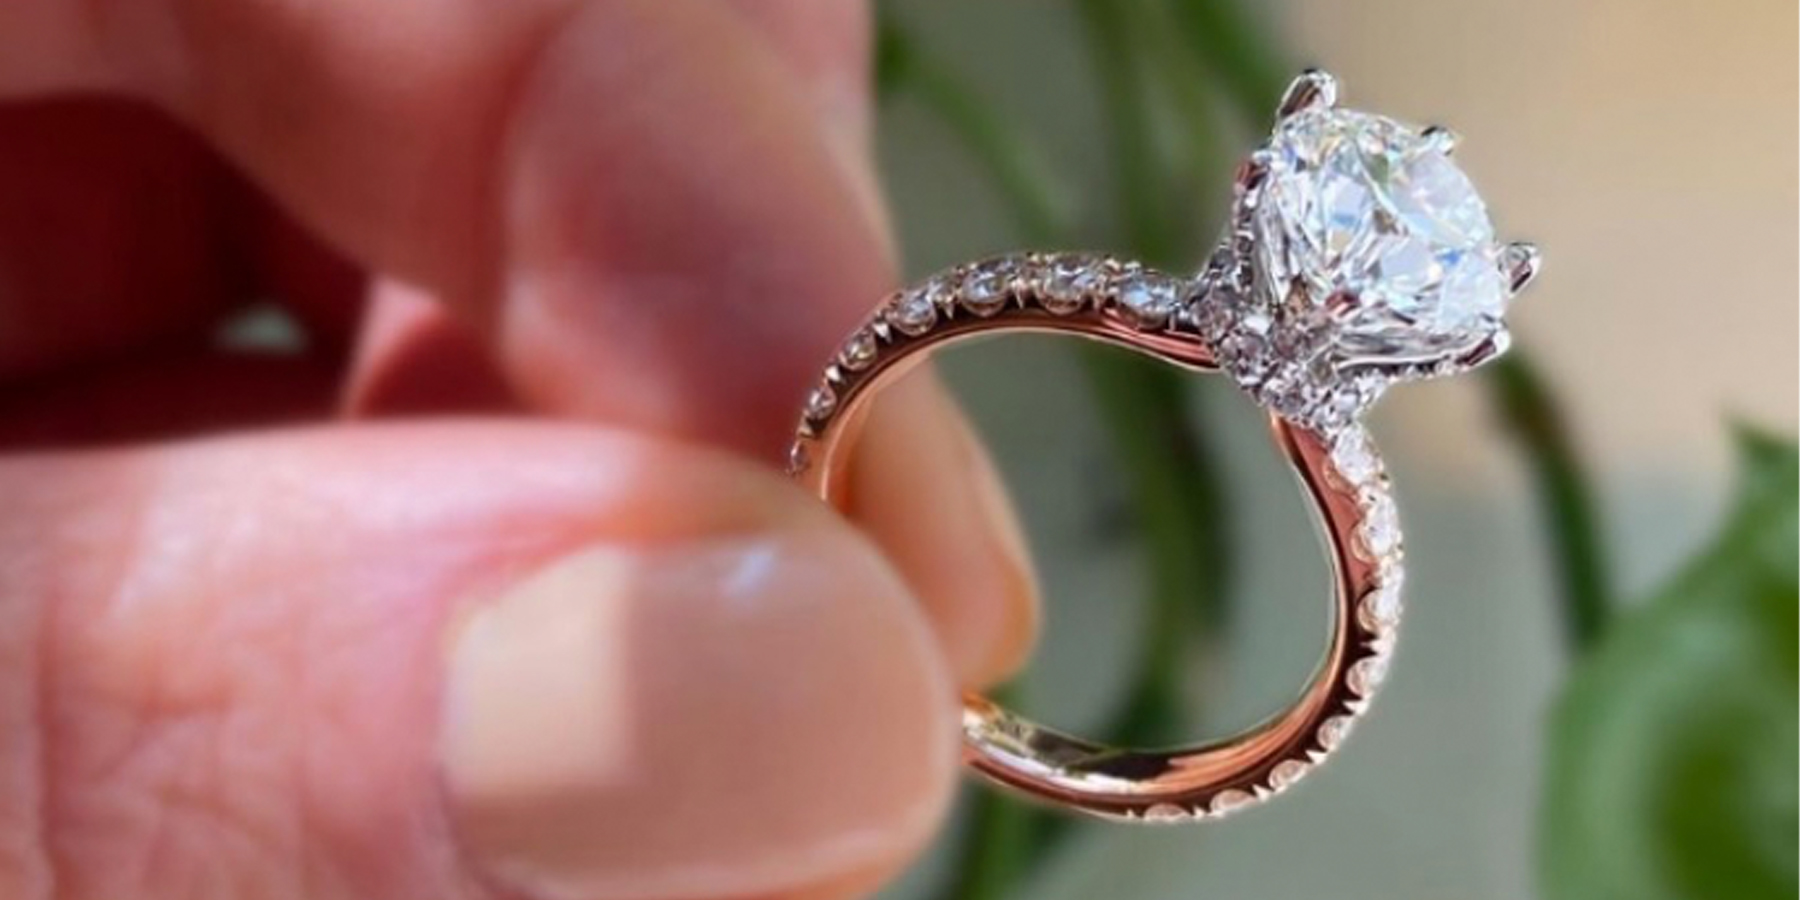 Vintage-Inspired Engagement Rings: Bringing Old World Glamour to Today